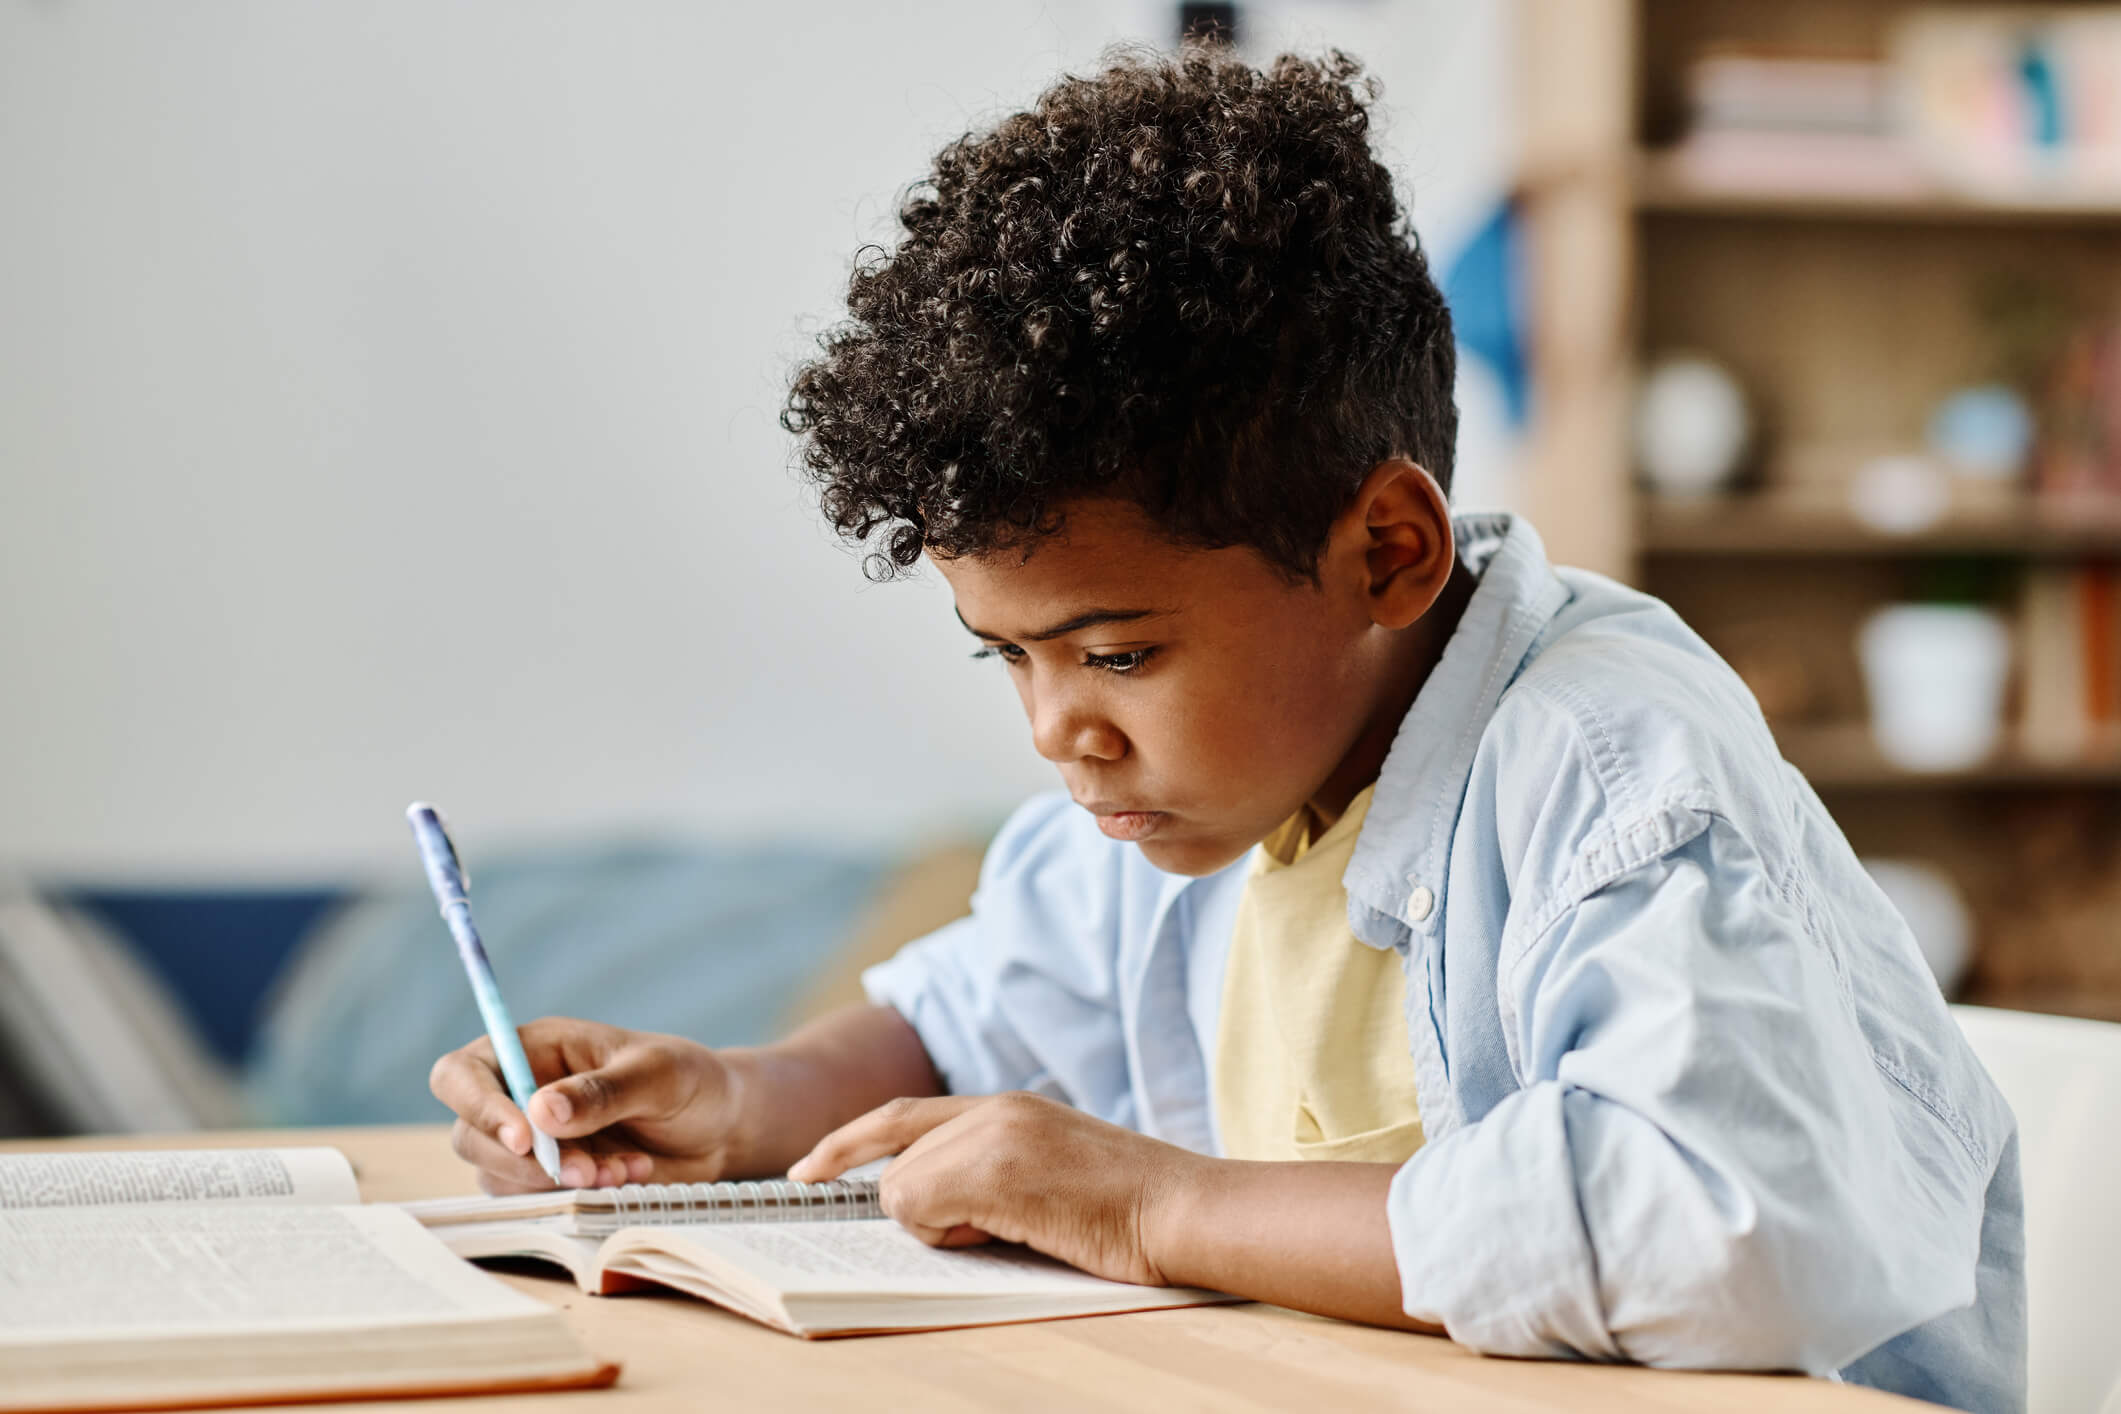 A boy is sitting at a desk and writing in a notebook; he is also reading a book with a focused expression.